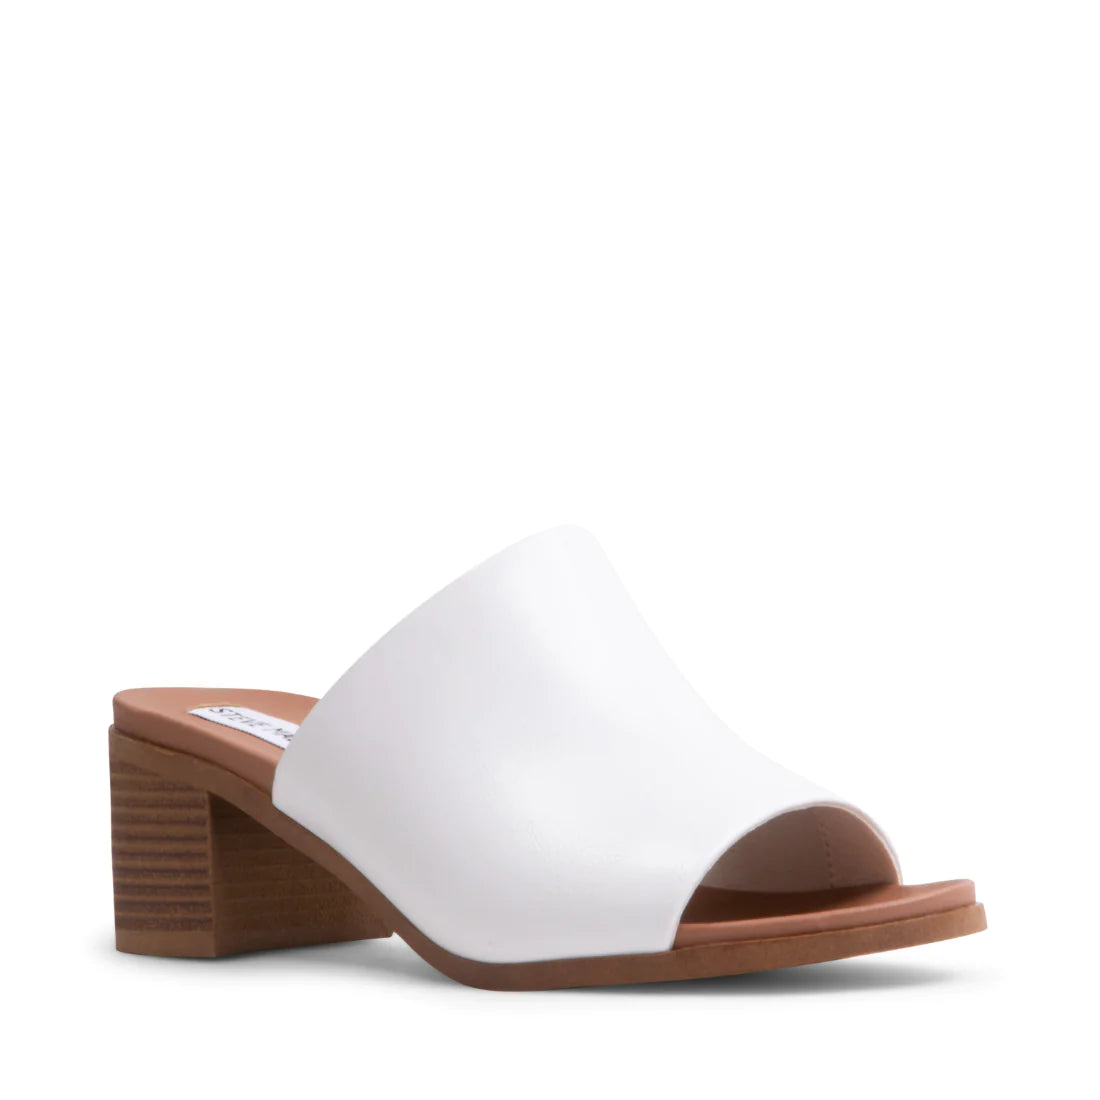 Steve Madden - Kacey Mule in White Leather